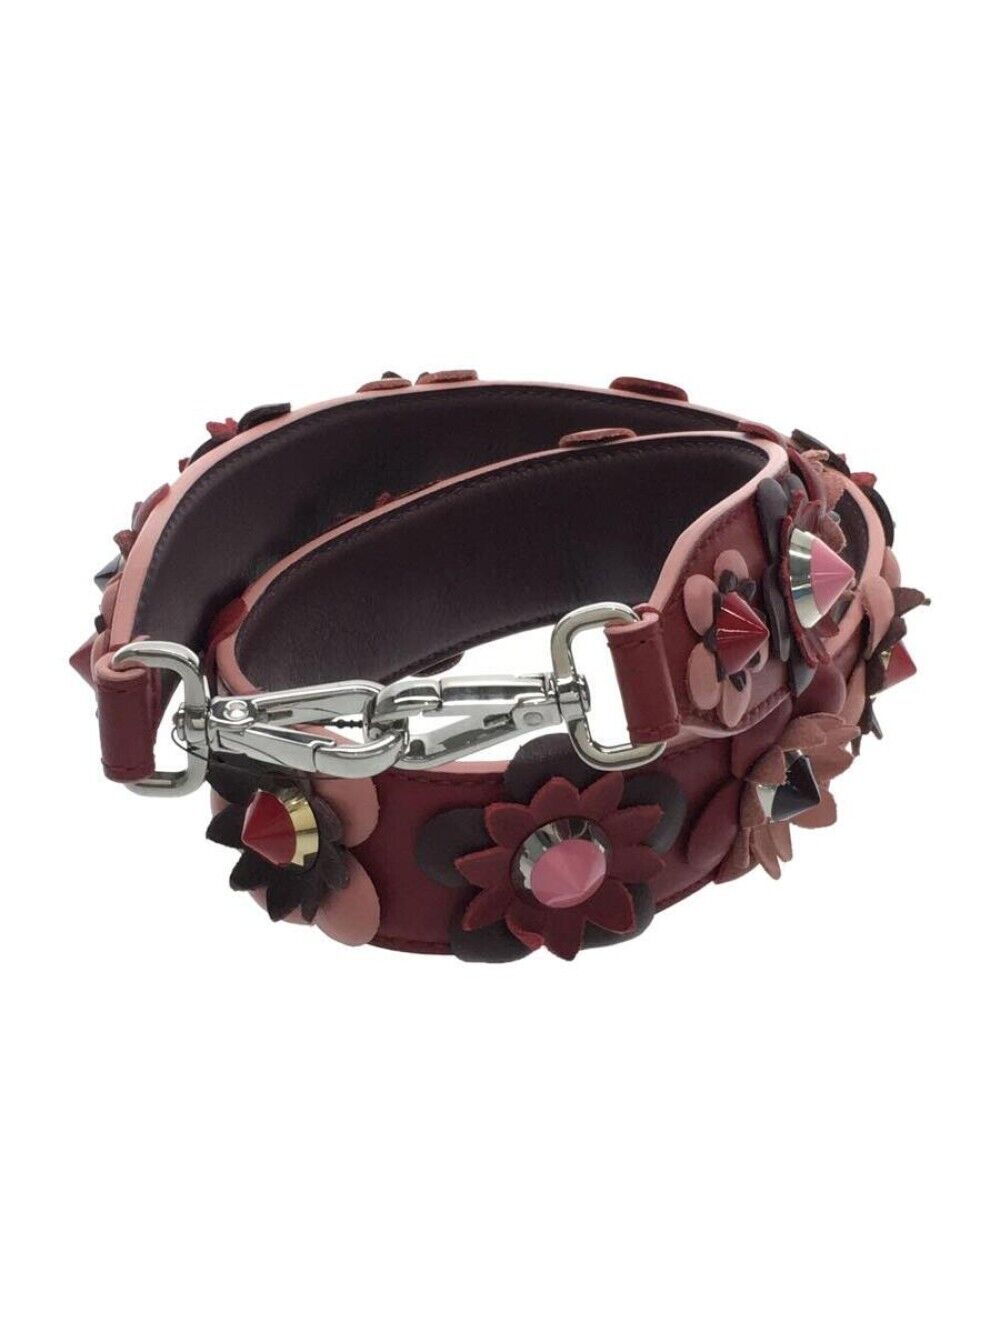 FENDI Shoulder Strap Leather RED Ladies Colored Stone Flower